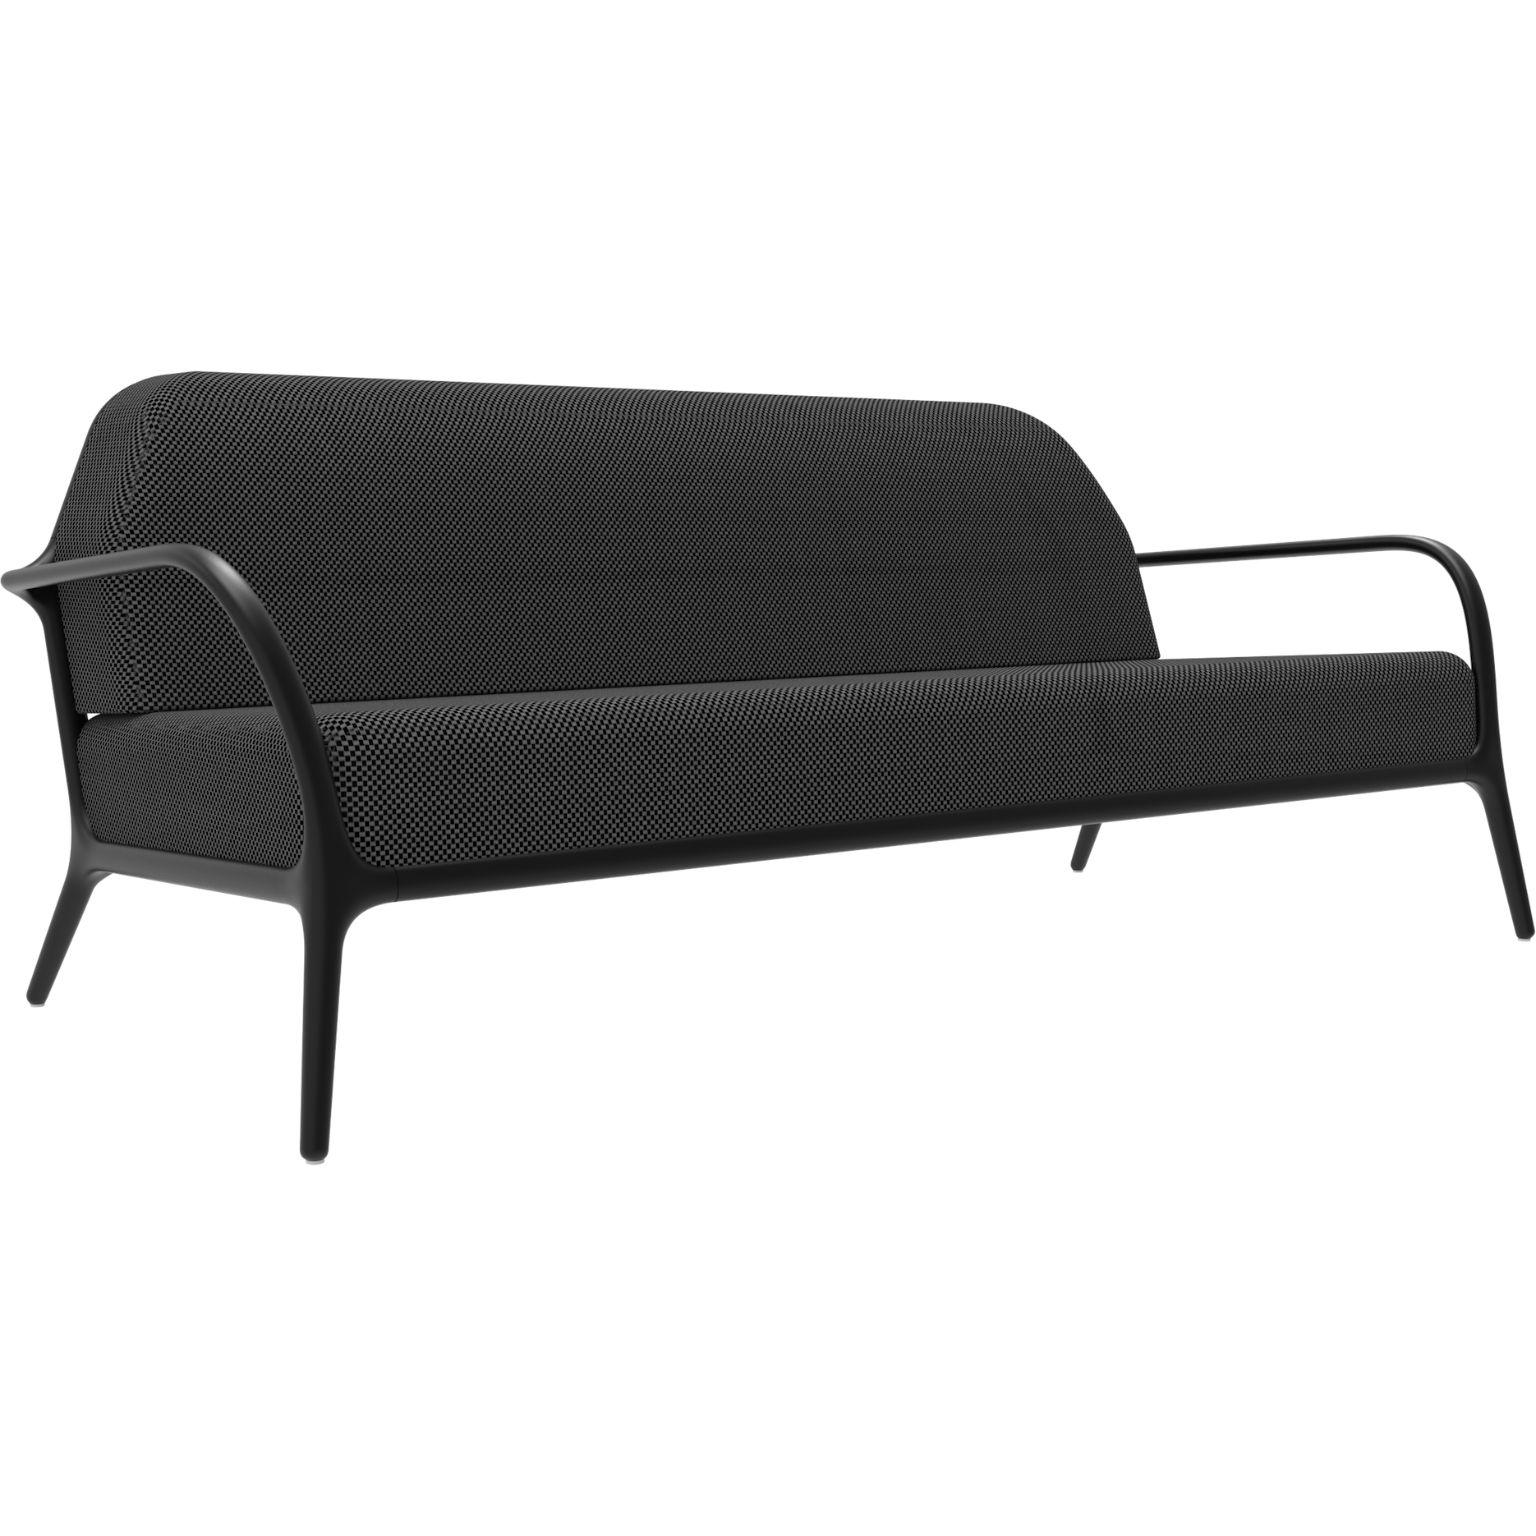 Xaloc black sofa by MOWEE
Dimensions: D100 x W200 x H81 cm (Seat Height 42 cm)
Material: Aluminium, Textile
Weight: 46 kg
Also Available in different colors and finishes. 

 Xaloc synthesizes the lines of interior furniture to extrapolate to